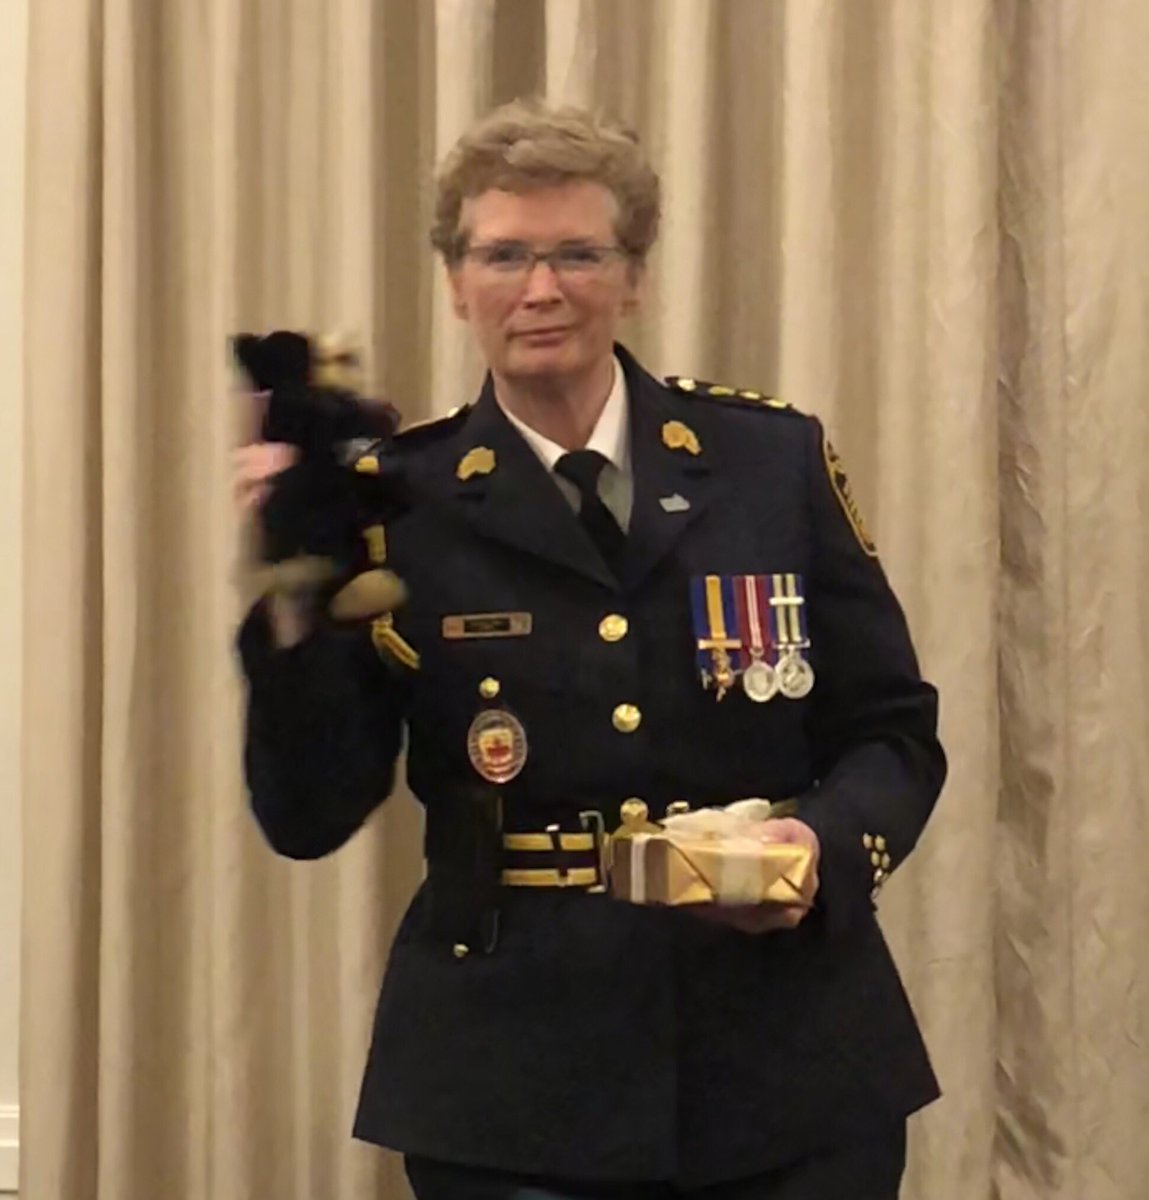 A surprise recognition of appreciation by @VictimServPeel at the Volunteer Appreciation Banquet. #ChiefEvans https://t.co/Z9lgiO7xGg